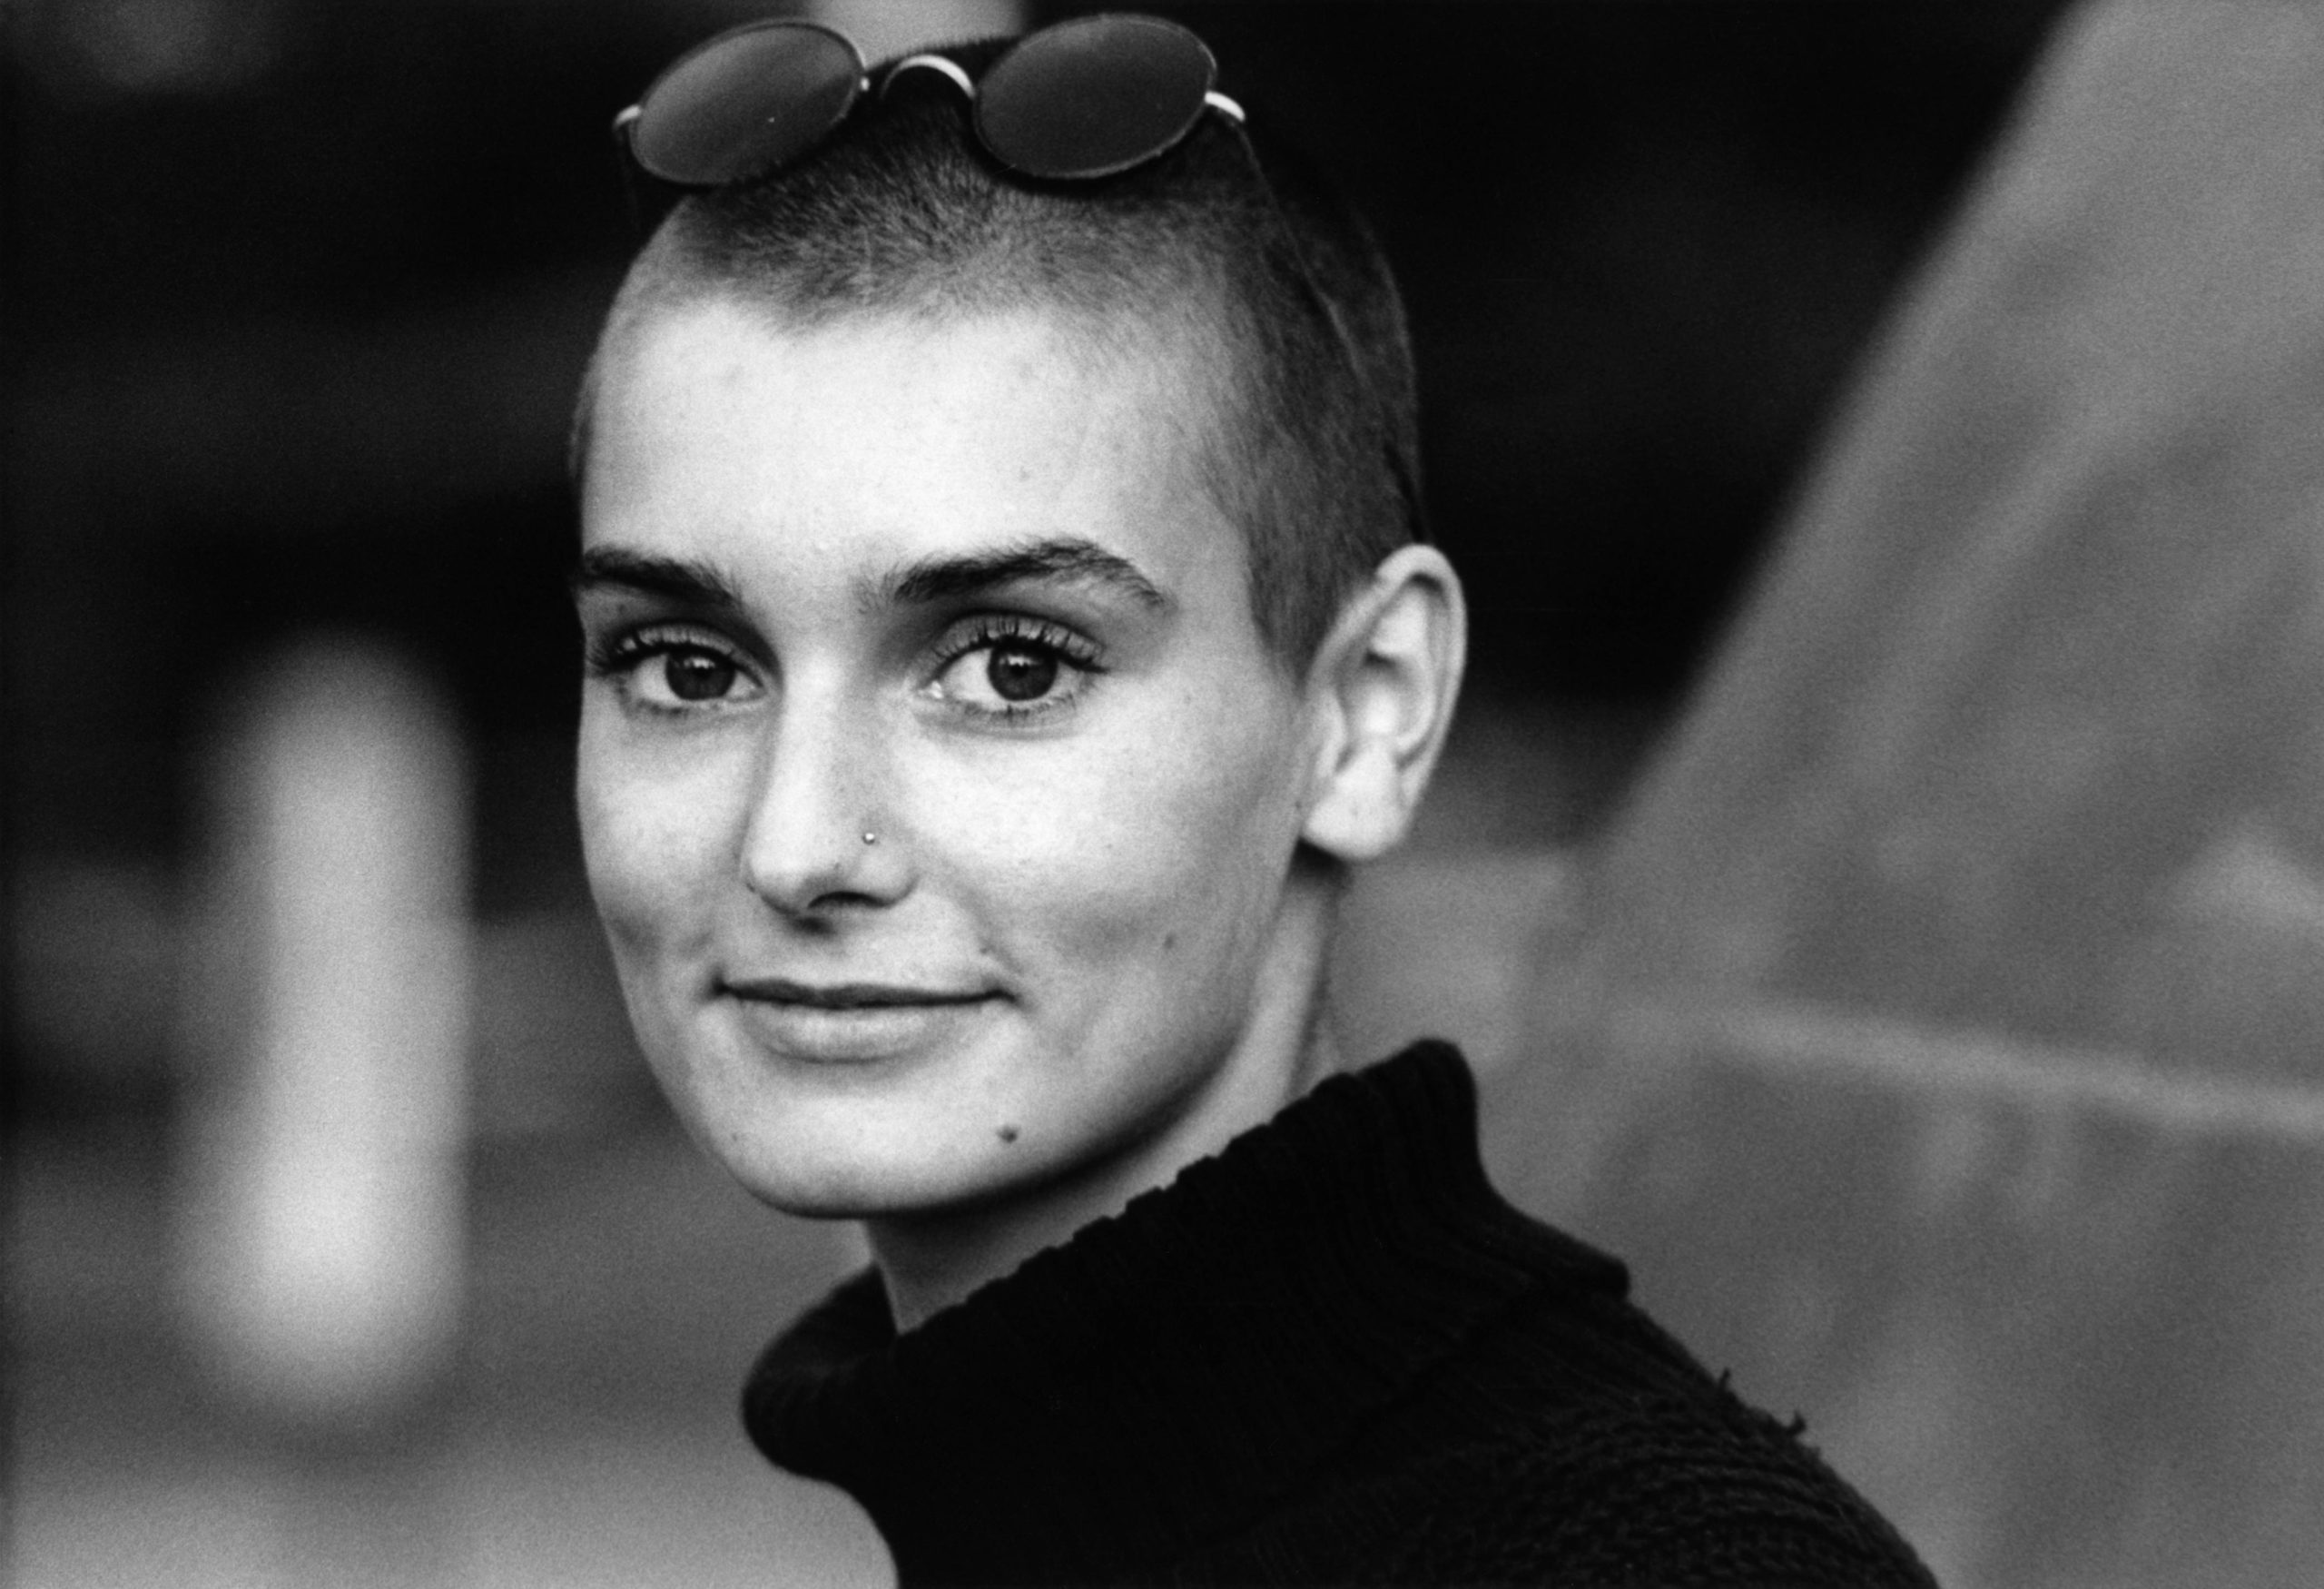 Sinéad O’Connor, A Tribute In Pictures